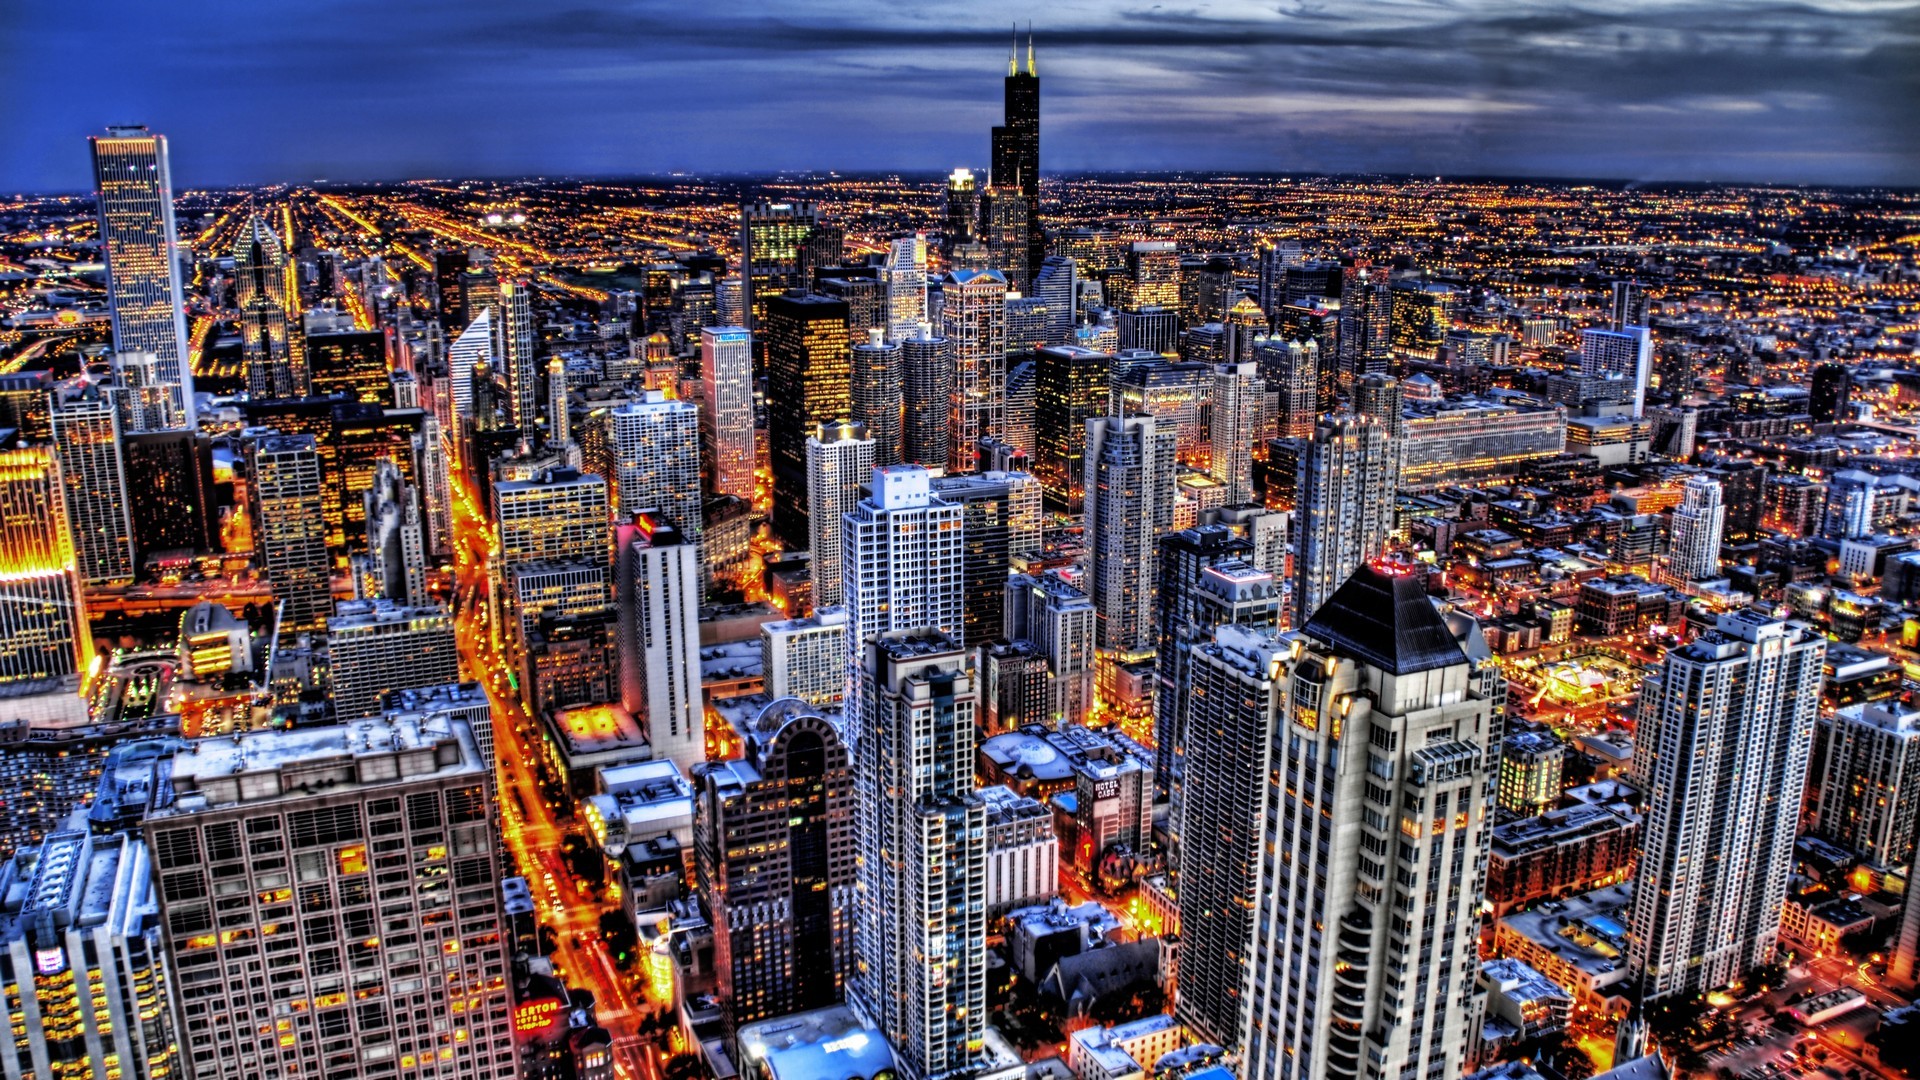 Wallpaper : city, cityscape, building, skyline, skyscraper, HDR, Chicago, metropolis, downtown, 1920x1080 px, urban area, metropolitan area, human settlement, neighbourhood, residential area, geographical feature, aerial photography 1920x1080